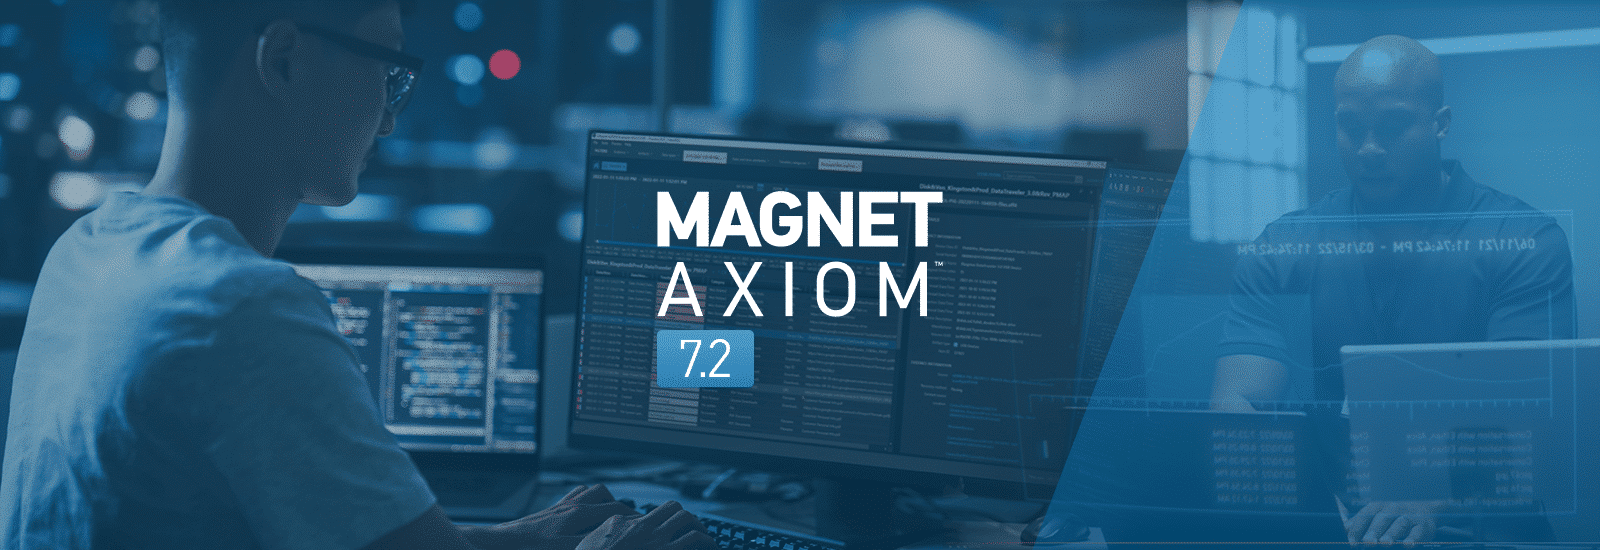 A decorative header for the Magnet AXIOM 7.2 release